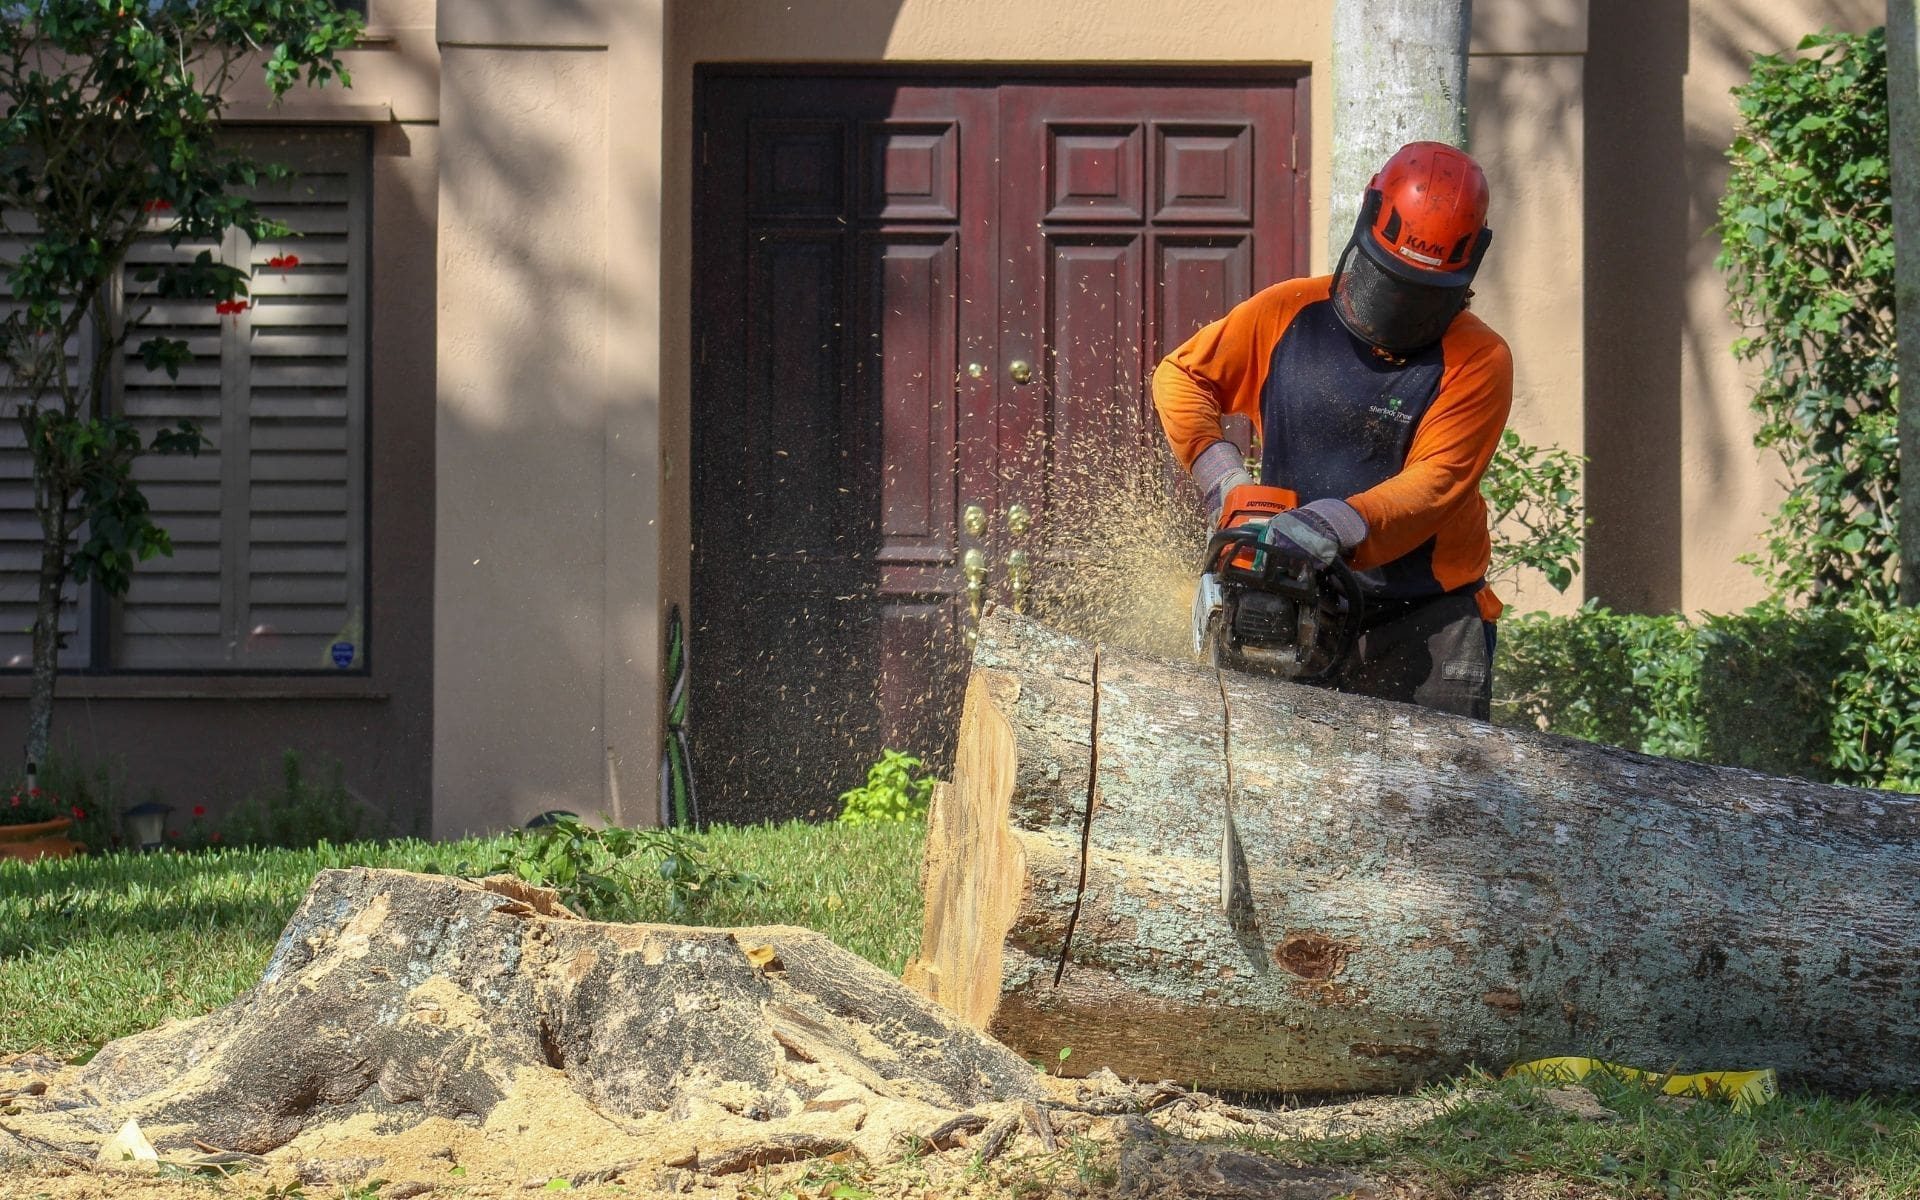 A Sherlock Tree Company crew member uses a chainsaw to cut a tree trunk during a tree removal, leaving a stump.